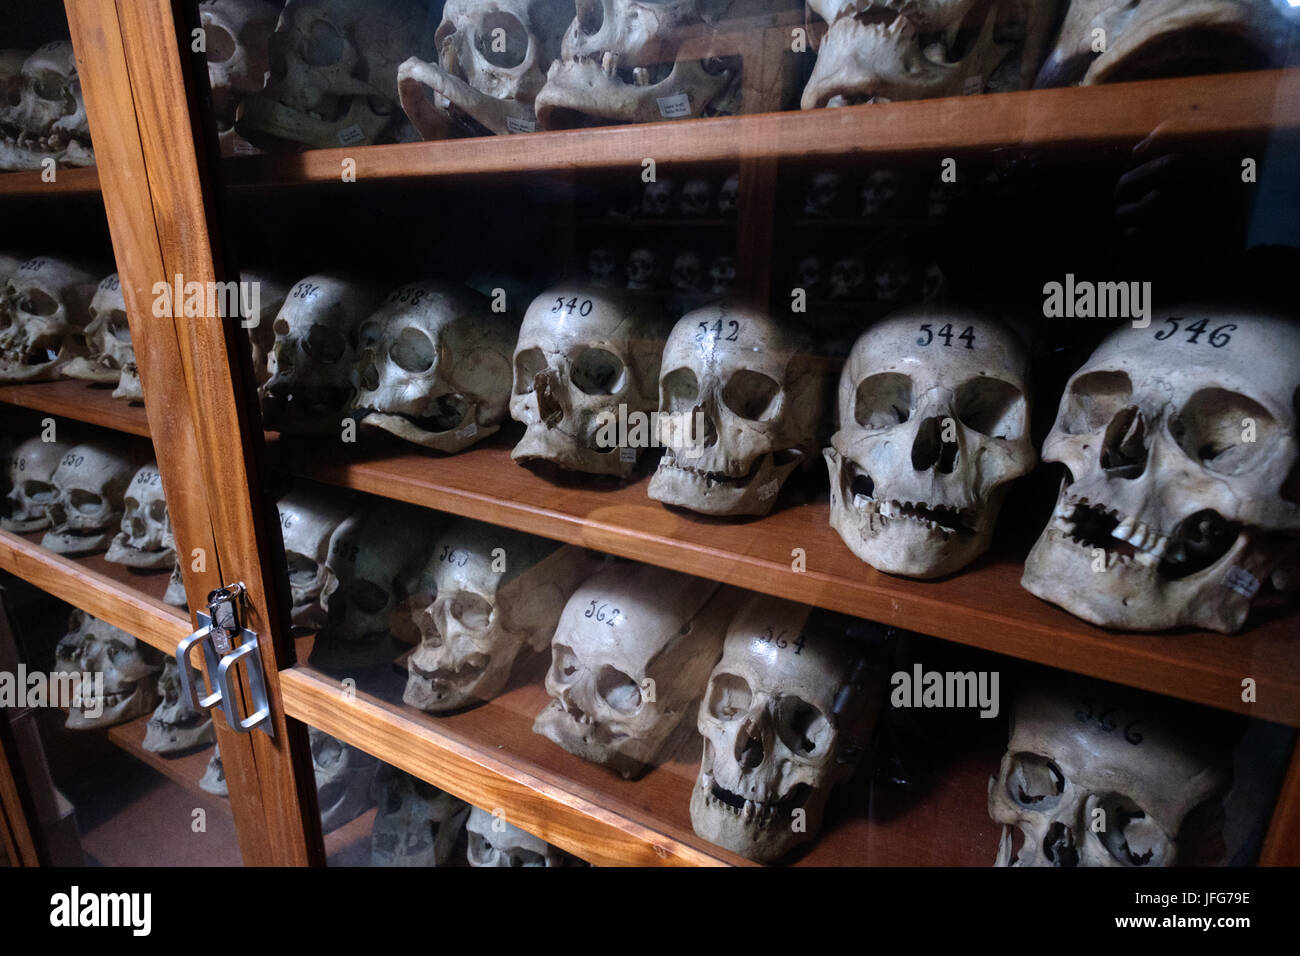 Rows of human skulls at the forensic anthropology lab, University of Coimbra, Portugal Stock Photo